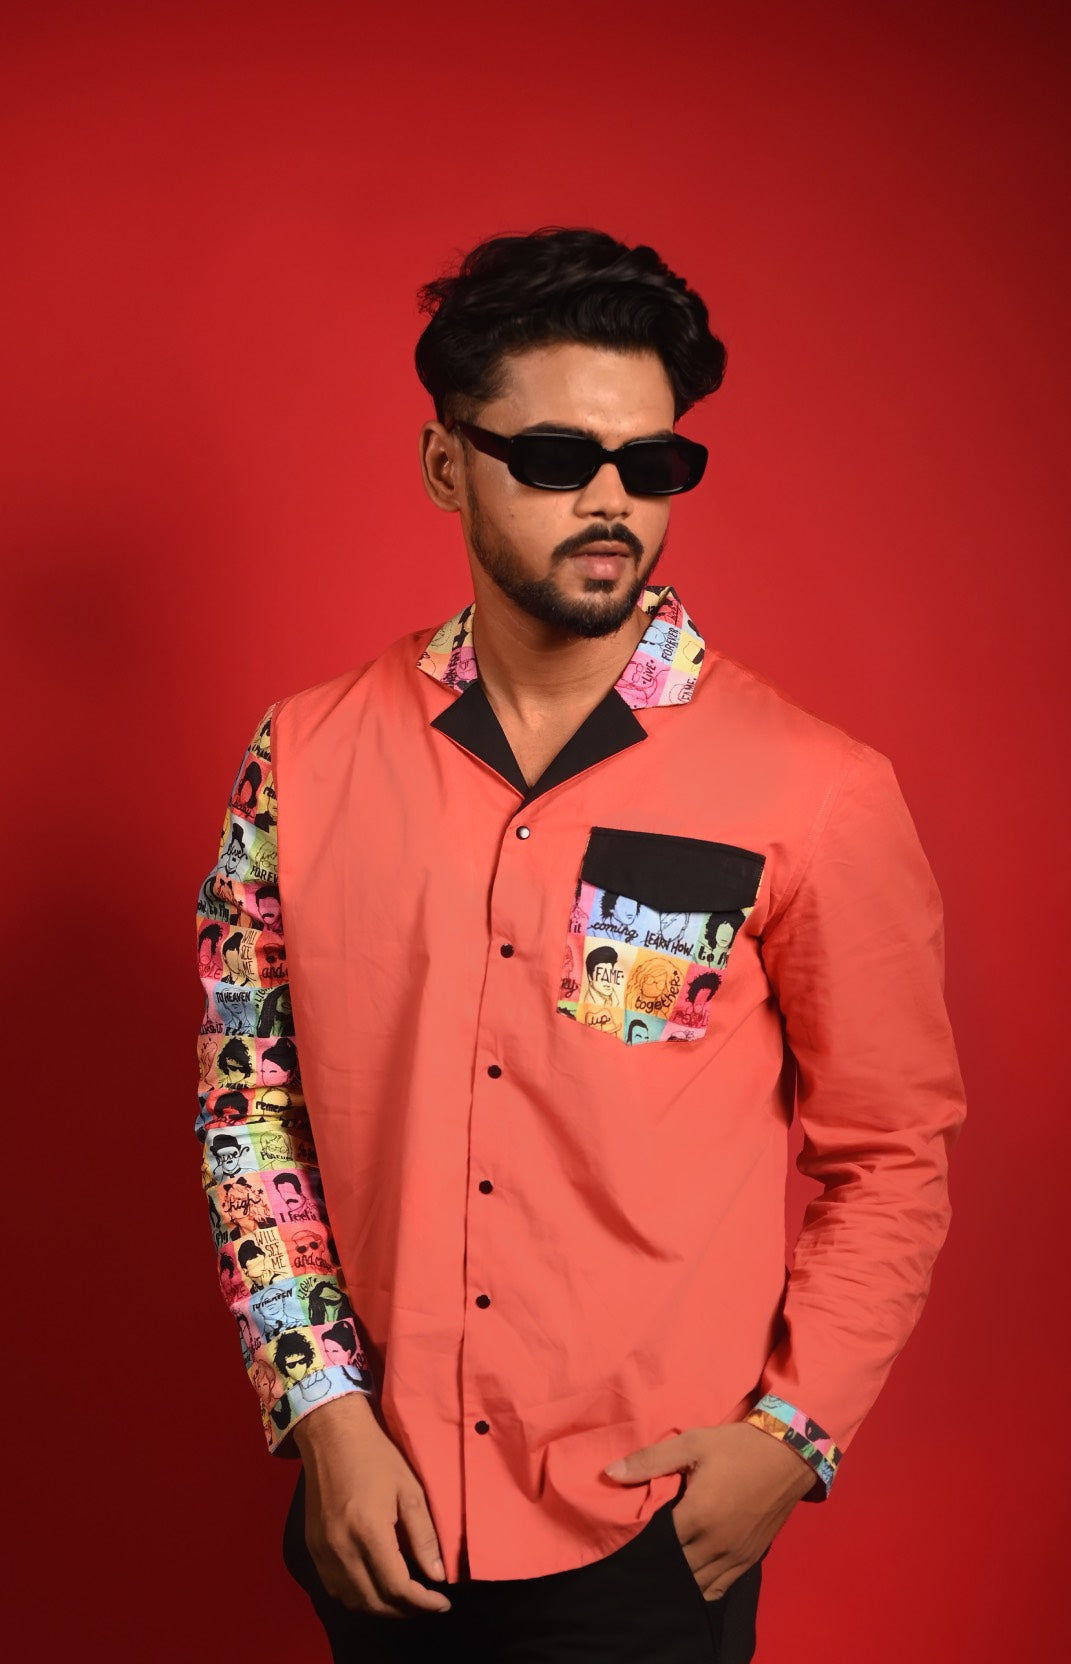 Vibrant peach shirt for your bright and joyful side